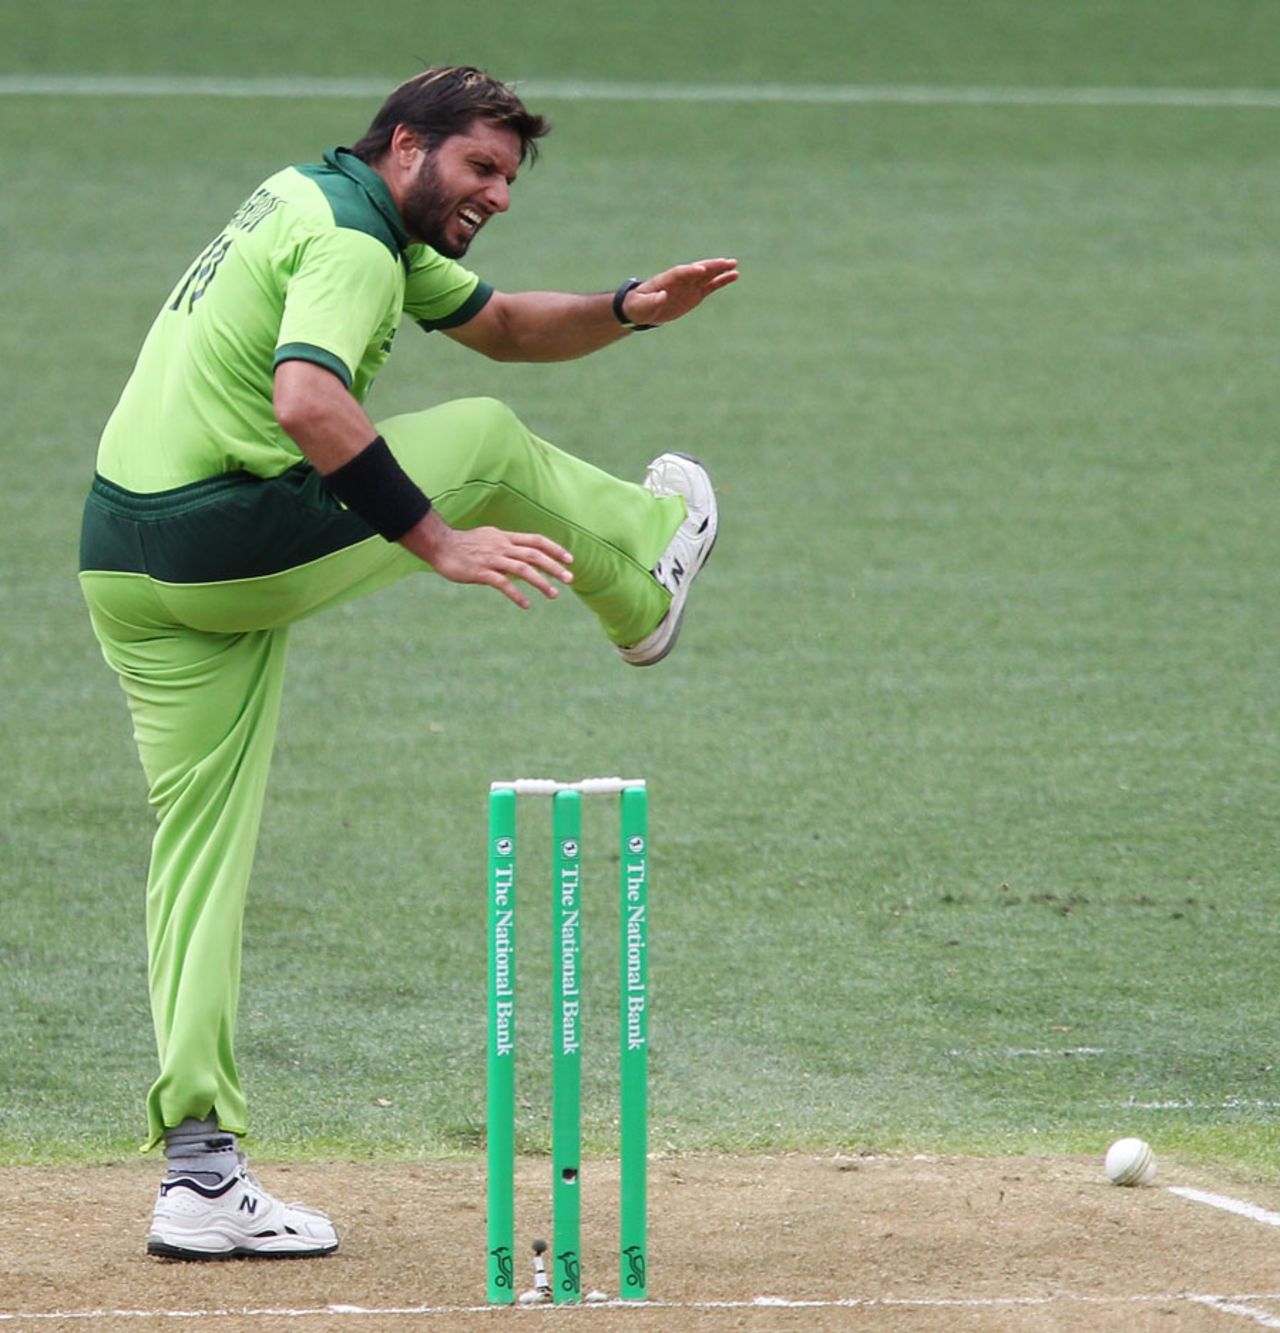 Shahid Afridi is frustrated after messing up a run-out opportunity, New Zealand v Pakistan, 6th ODI, Auckland, February 5, 2011